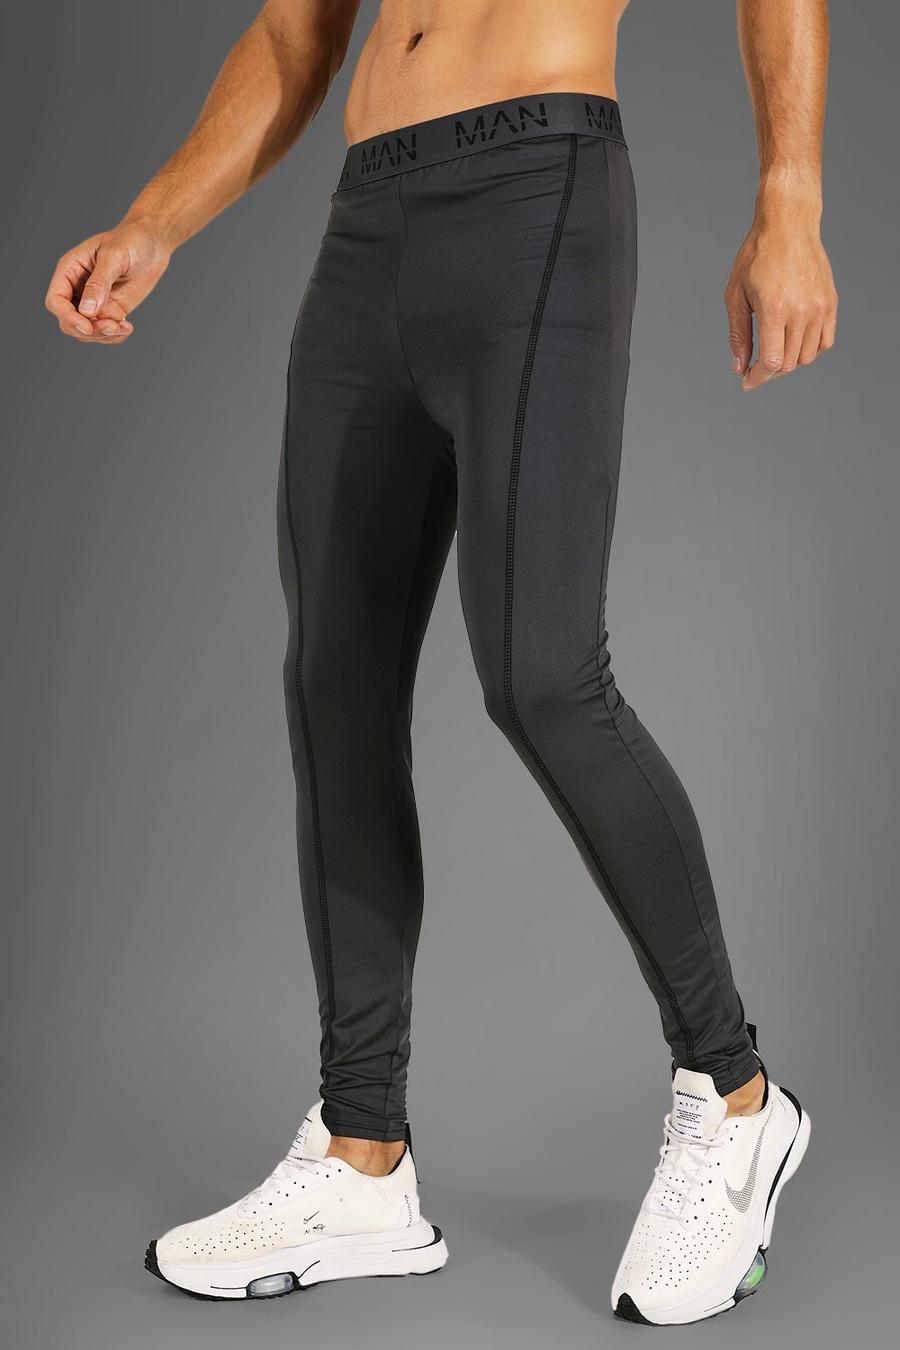 Charcoal Tall Man Active Gym Compression Leggings image number 1